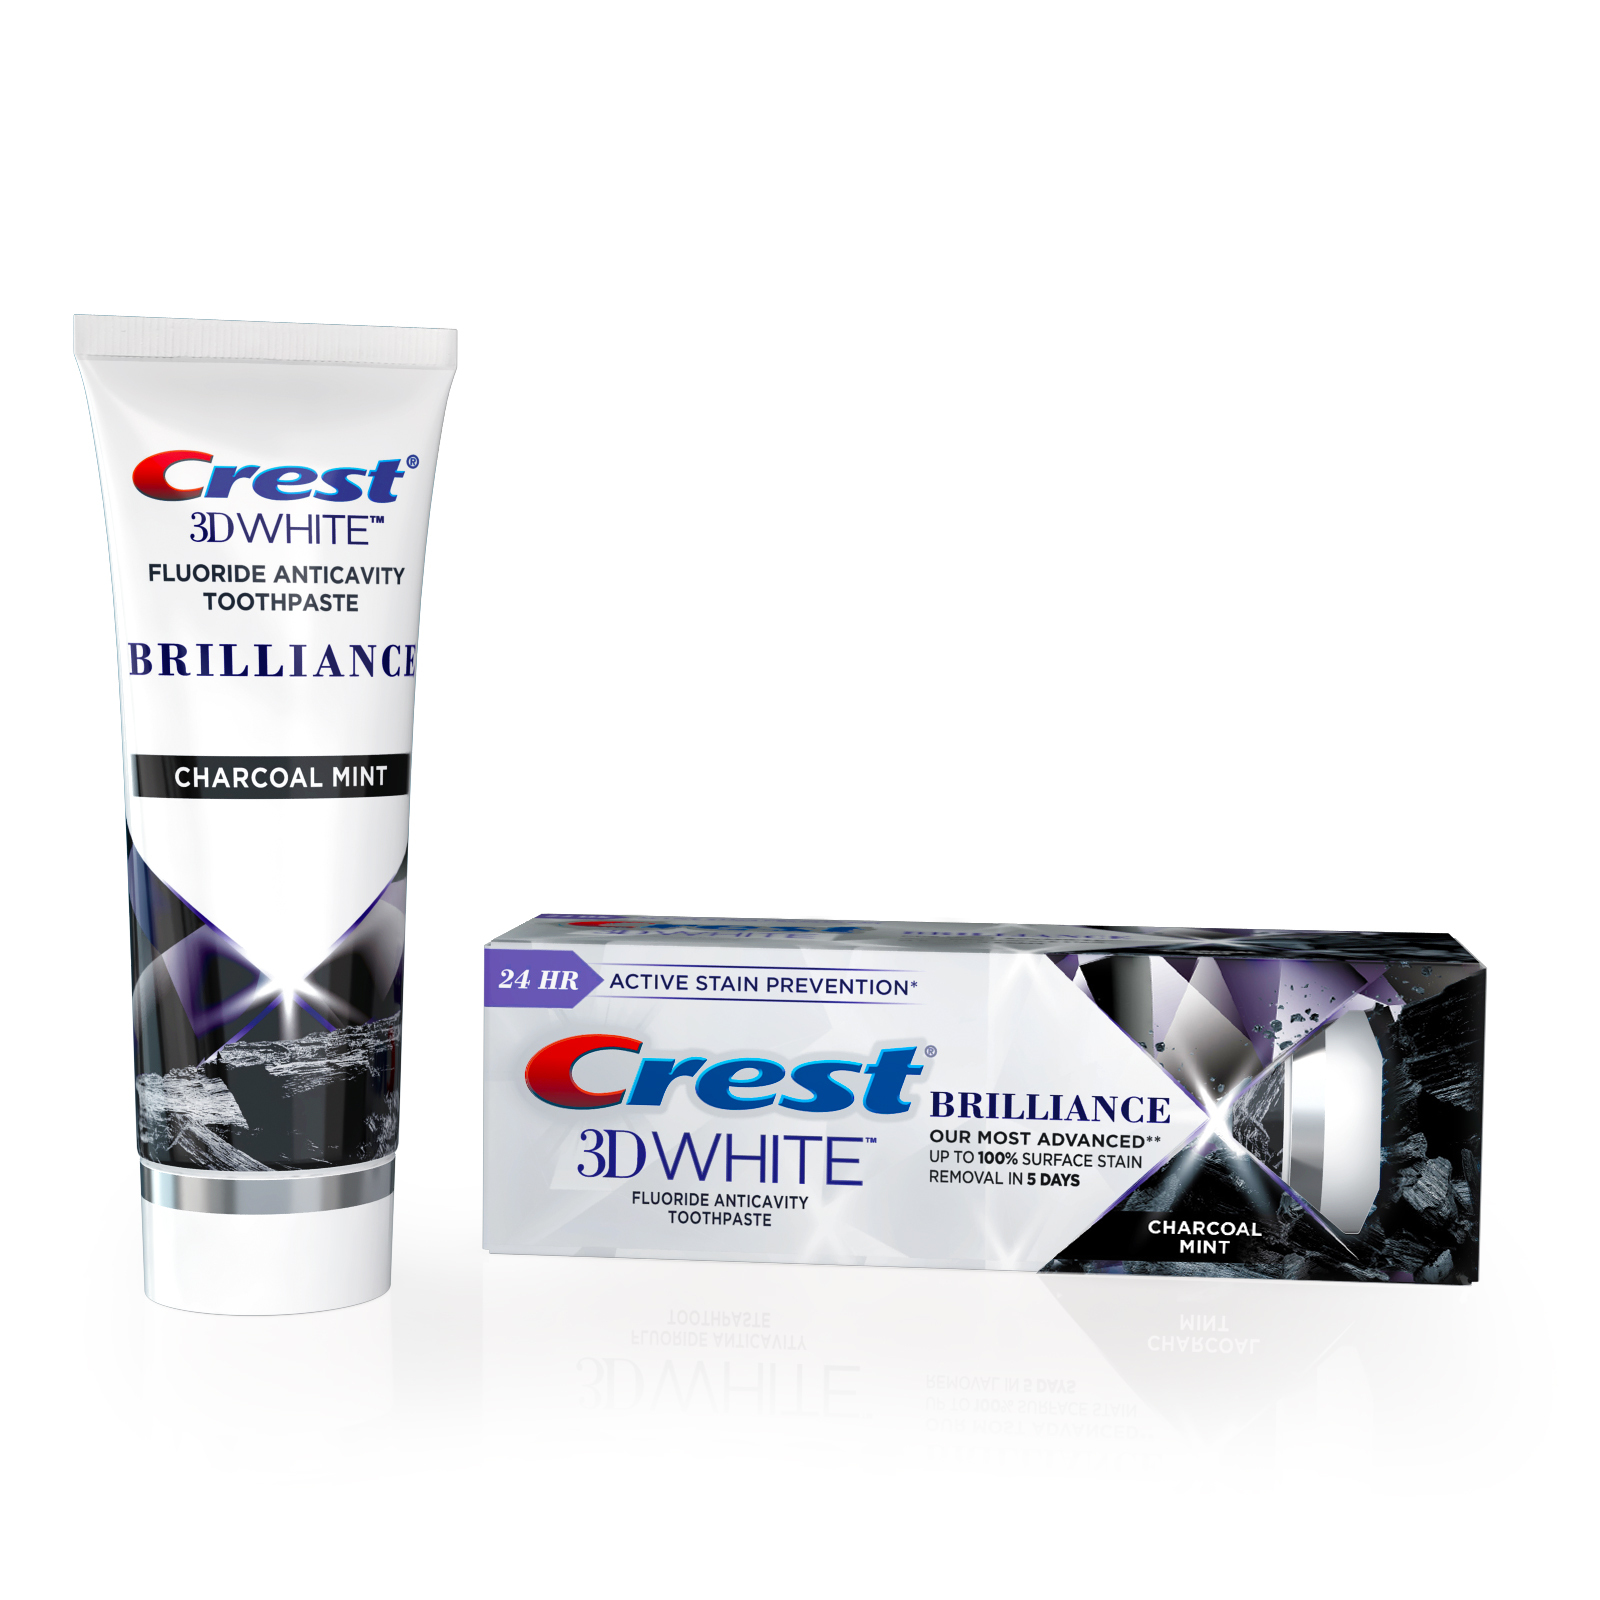 Crest 3D White Brilliance Charcoal Teeth Whitening Toothpaste, Mint, 3.9 oz - image 2 of 11